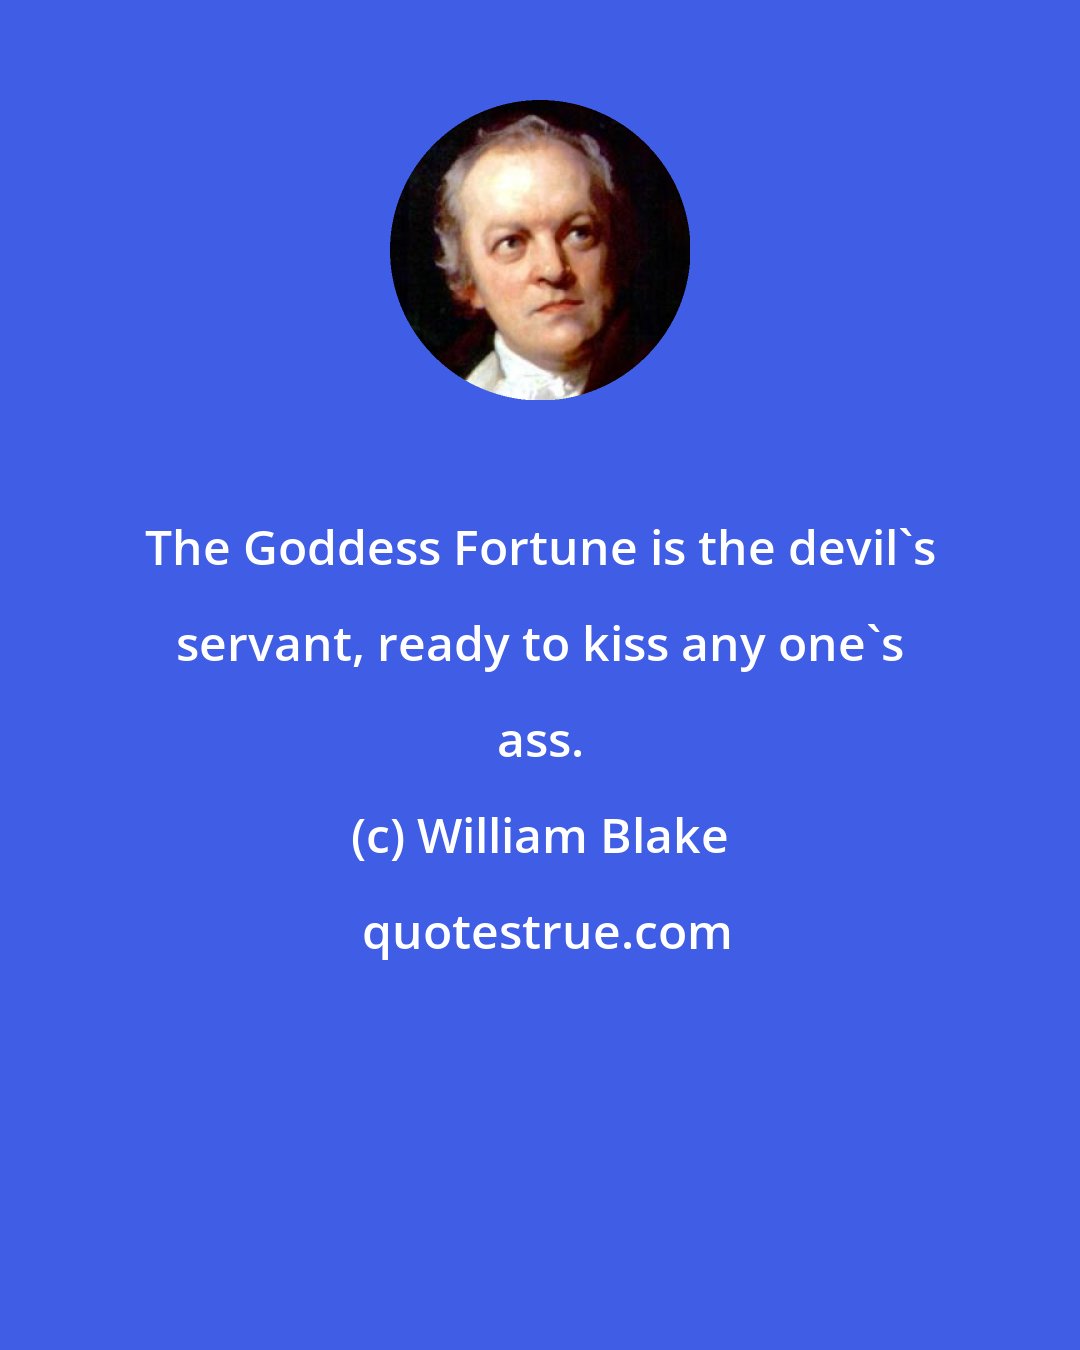 William Blake: The Goddess Fortune is the devil's servant, ready to kiss any one's ass.